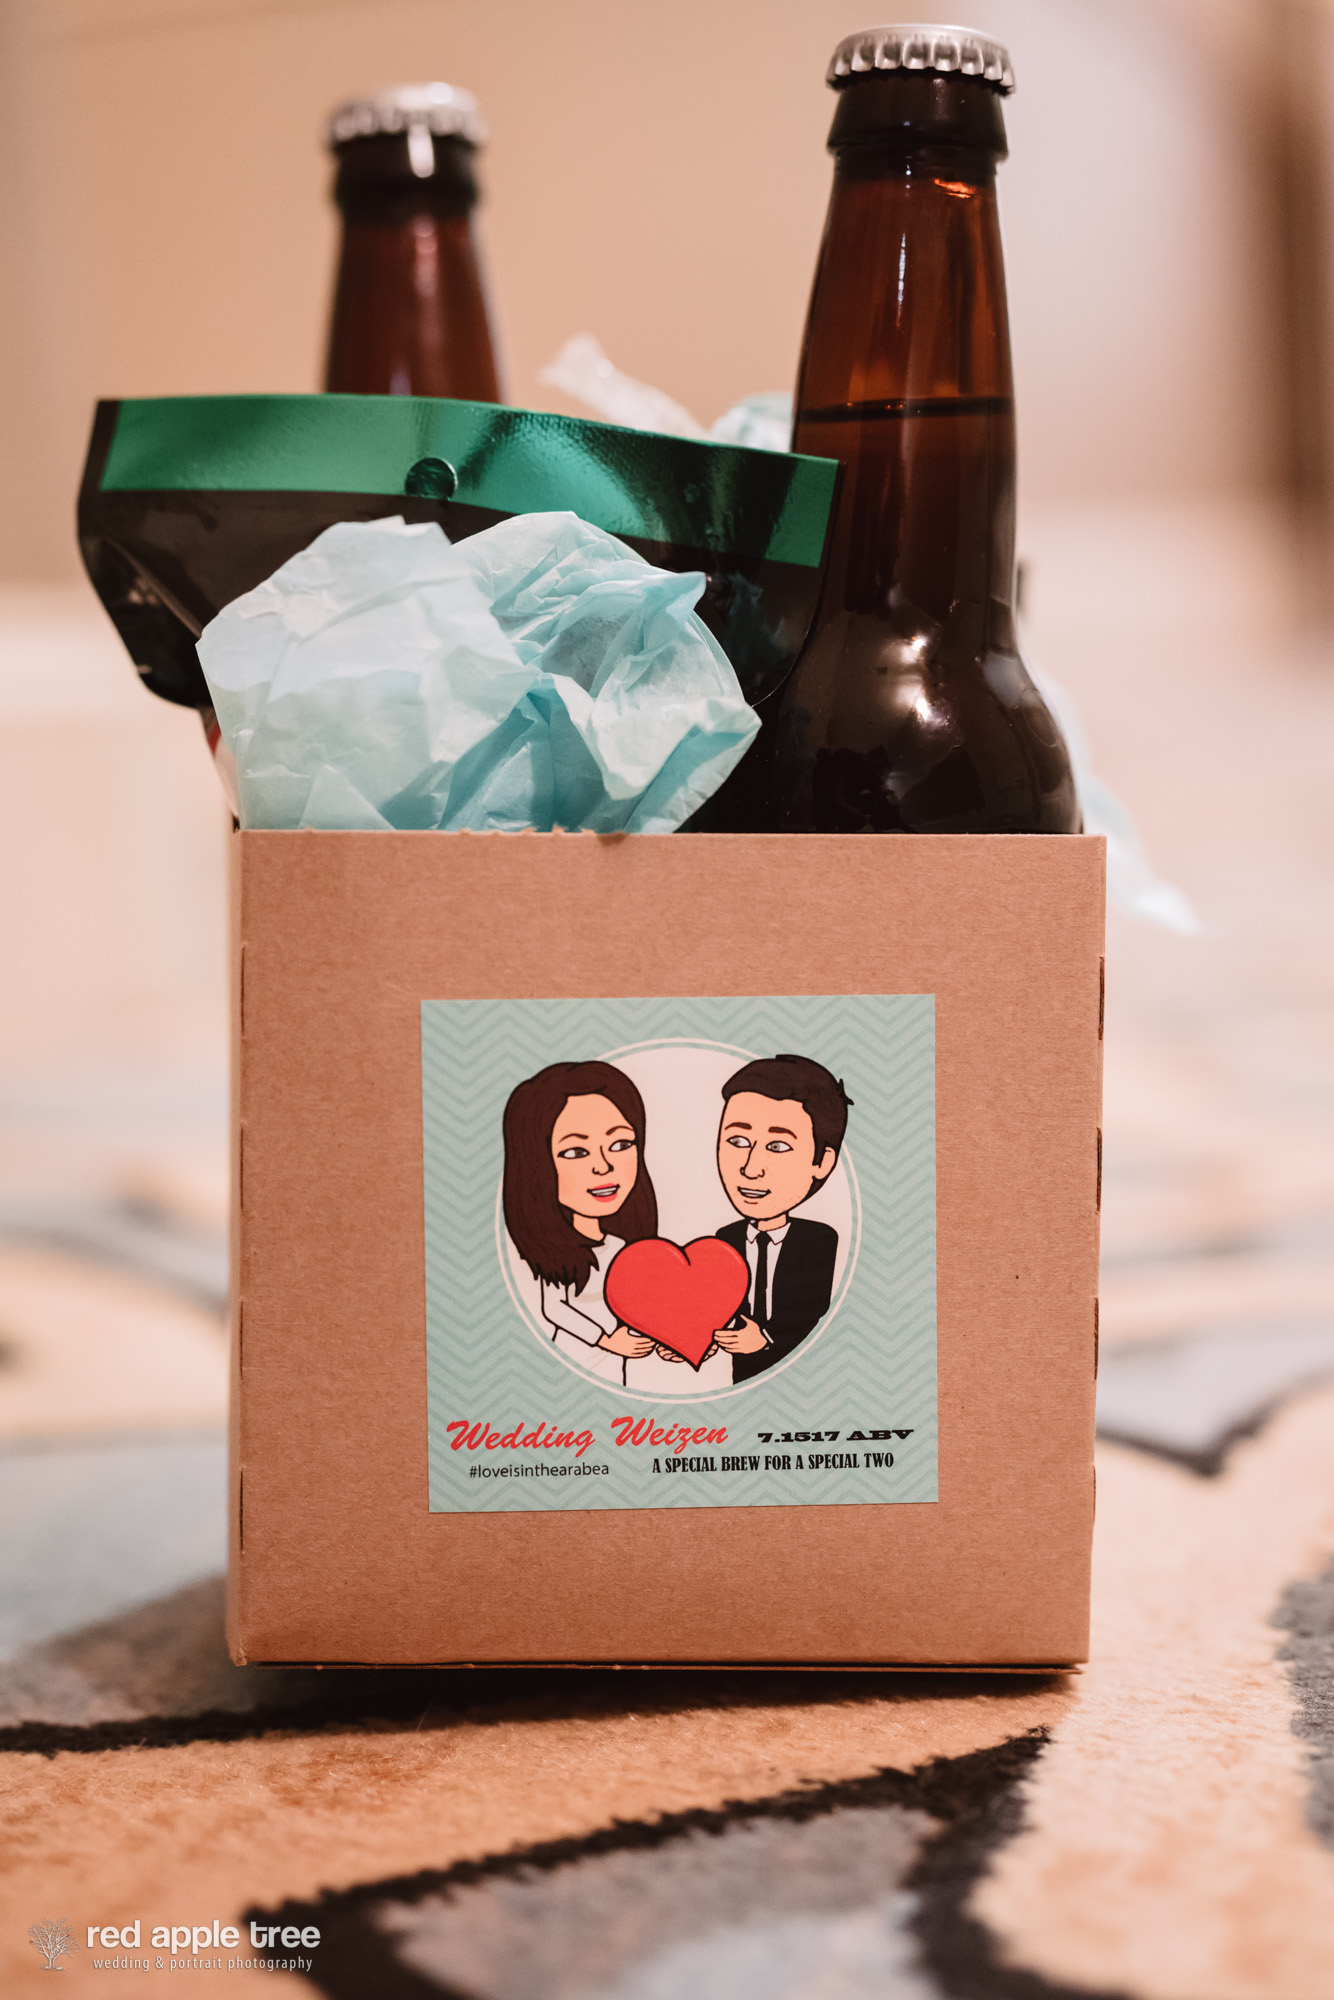  How cool is this wedding favor?!? 